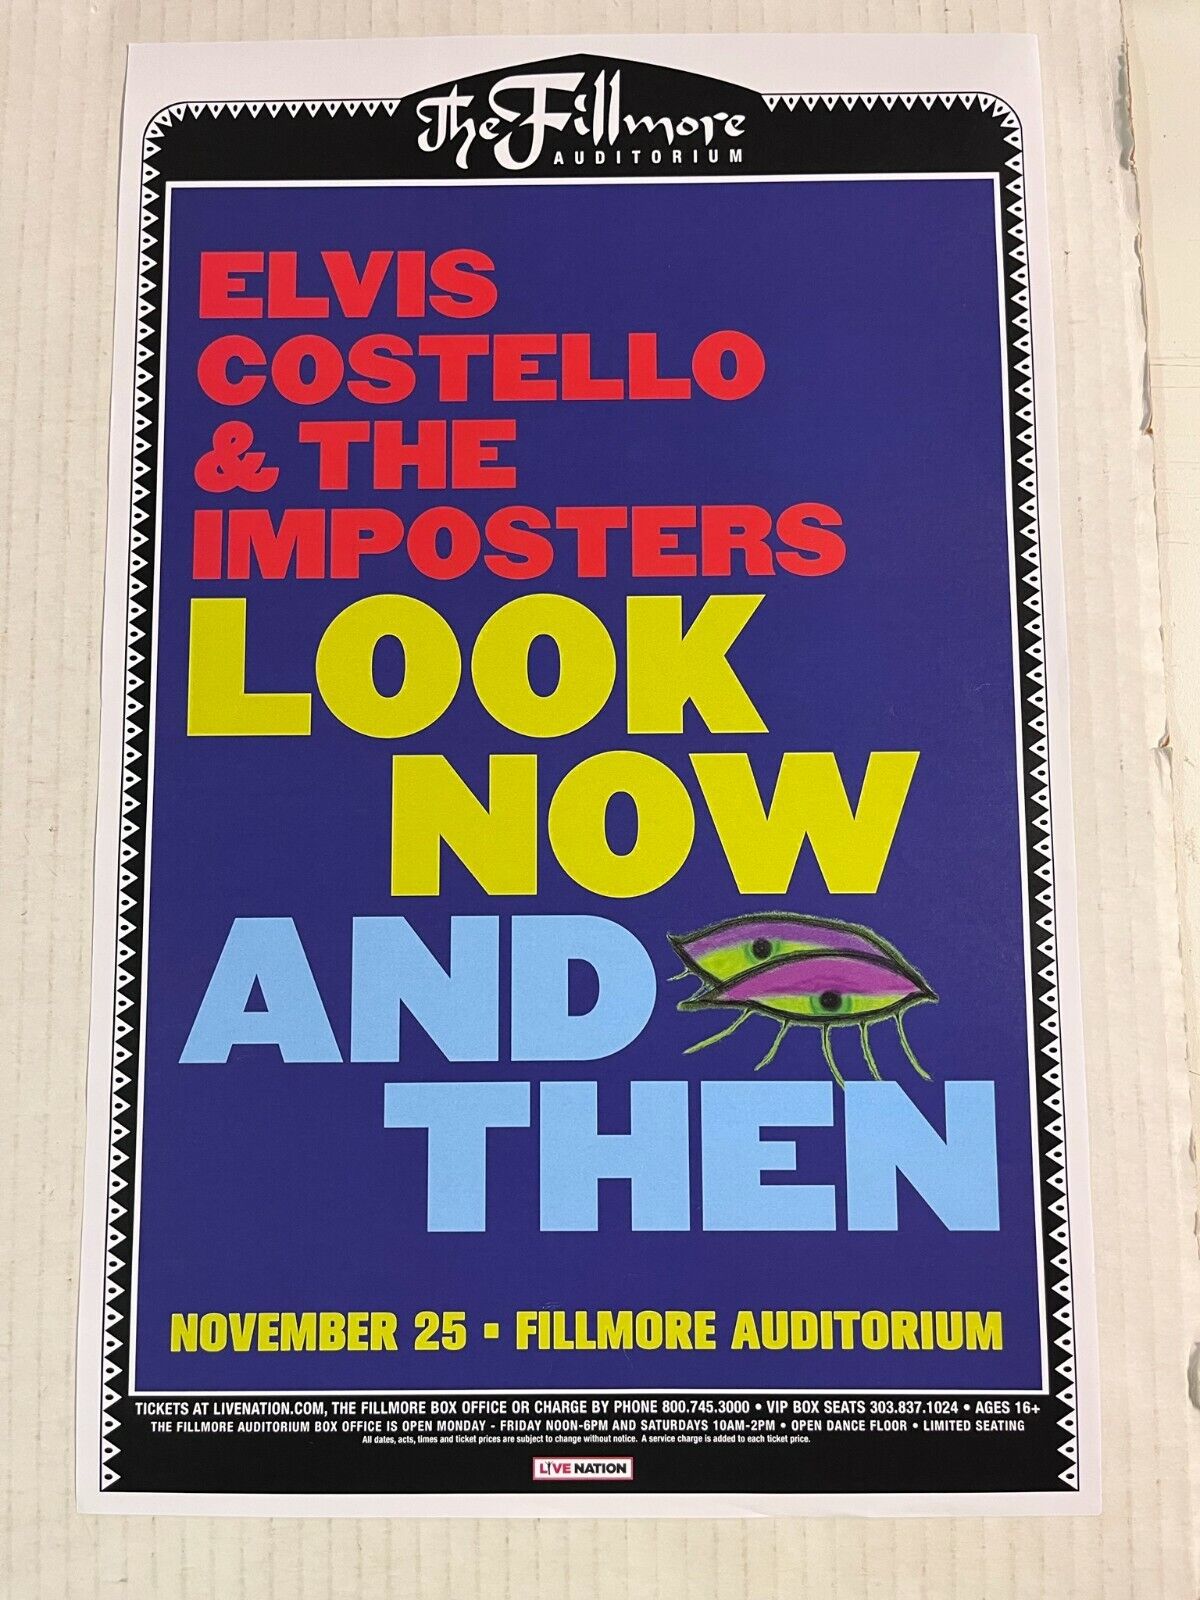 Elvis Costello Imposters Look Now And Then Tour Fillmore Denver 2021 Flyer